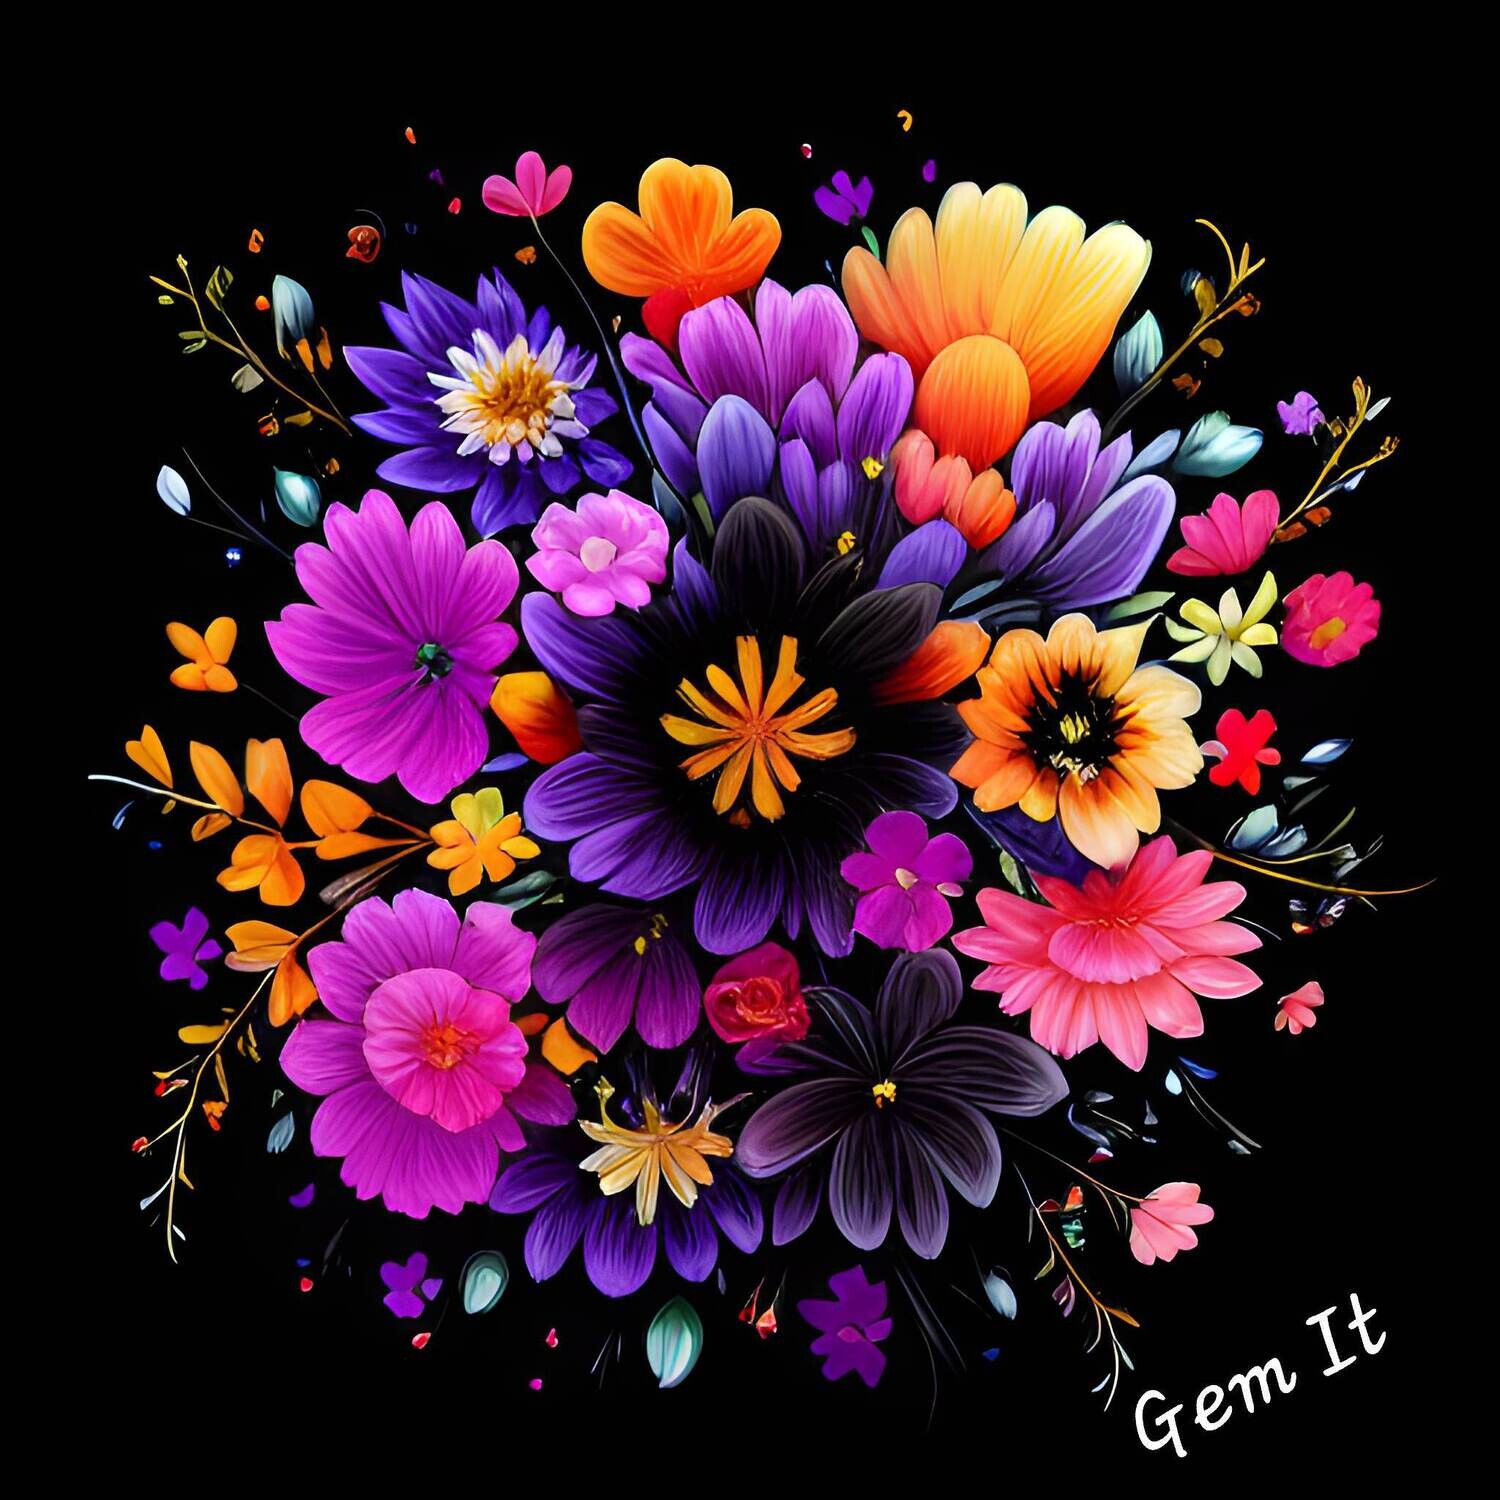 Flowers on Black 803 - Full Drill Diamond Painting - Specially ordered for you. Delivery is approximately 4 - 6 weeks.